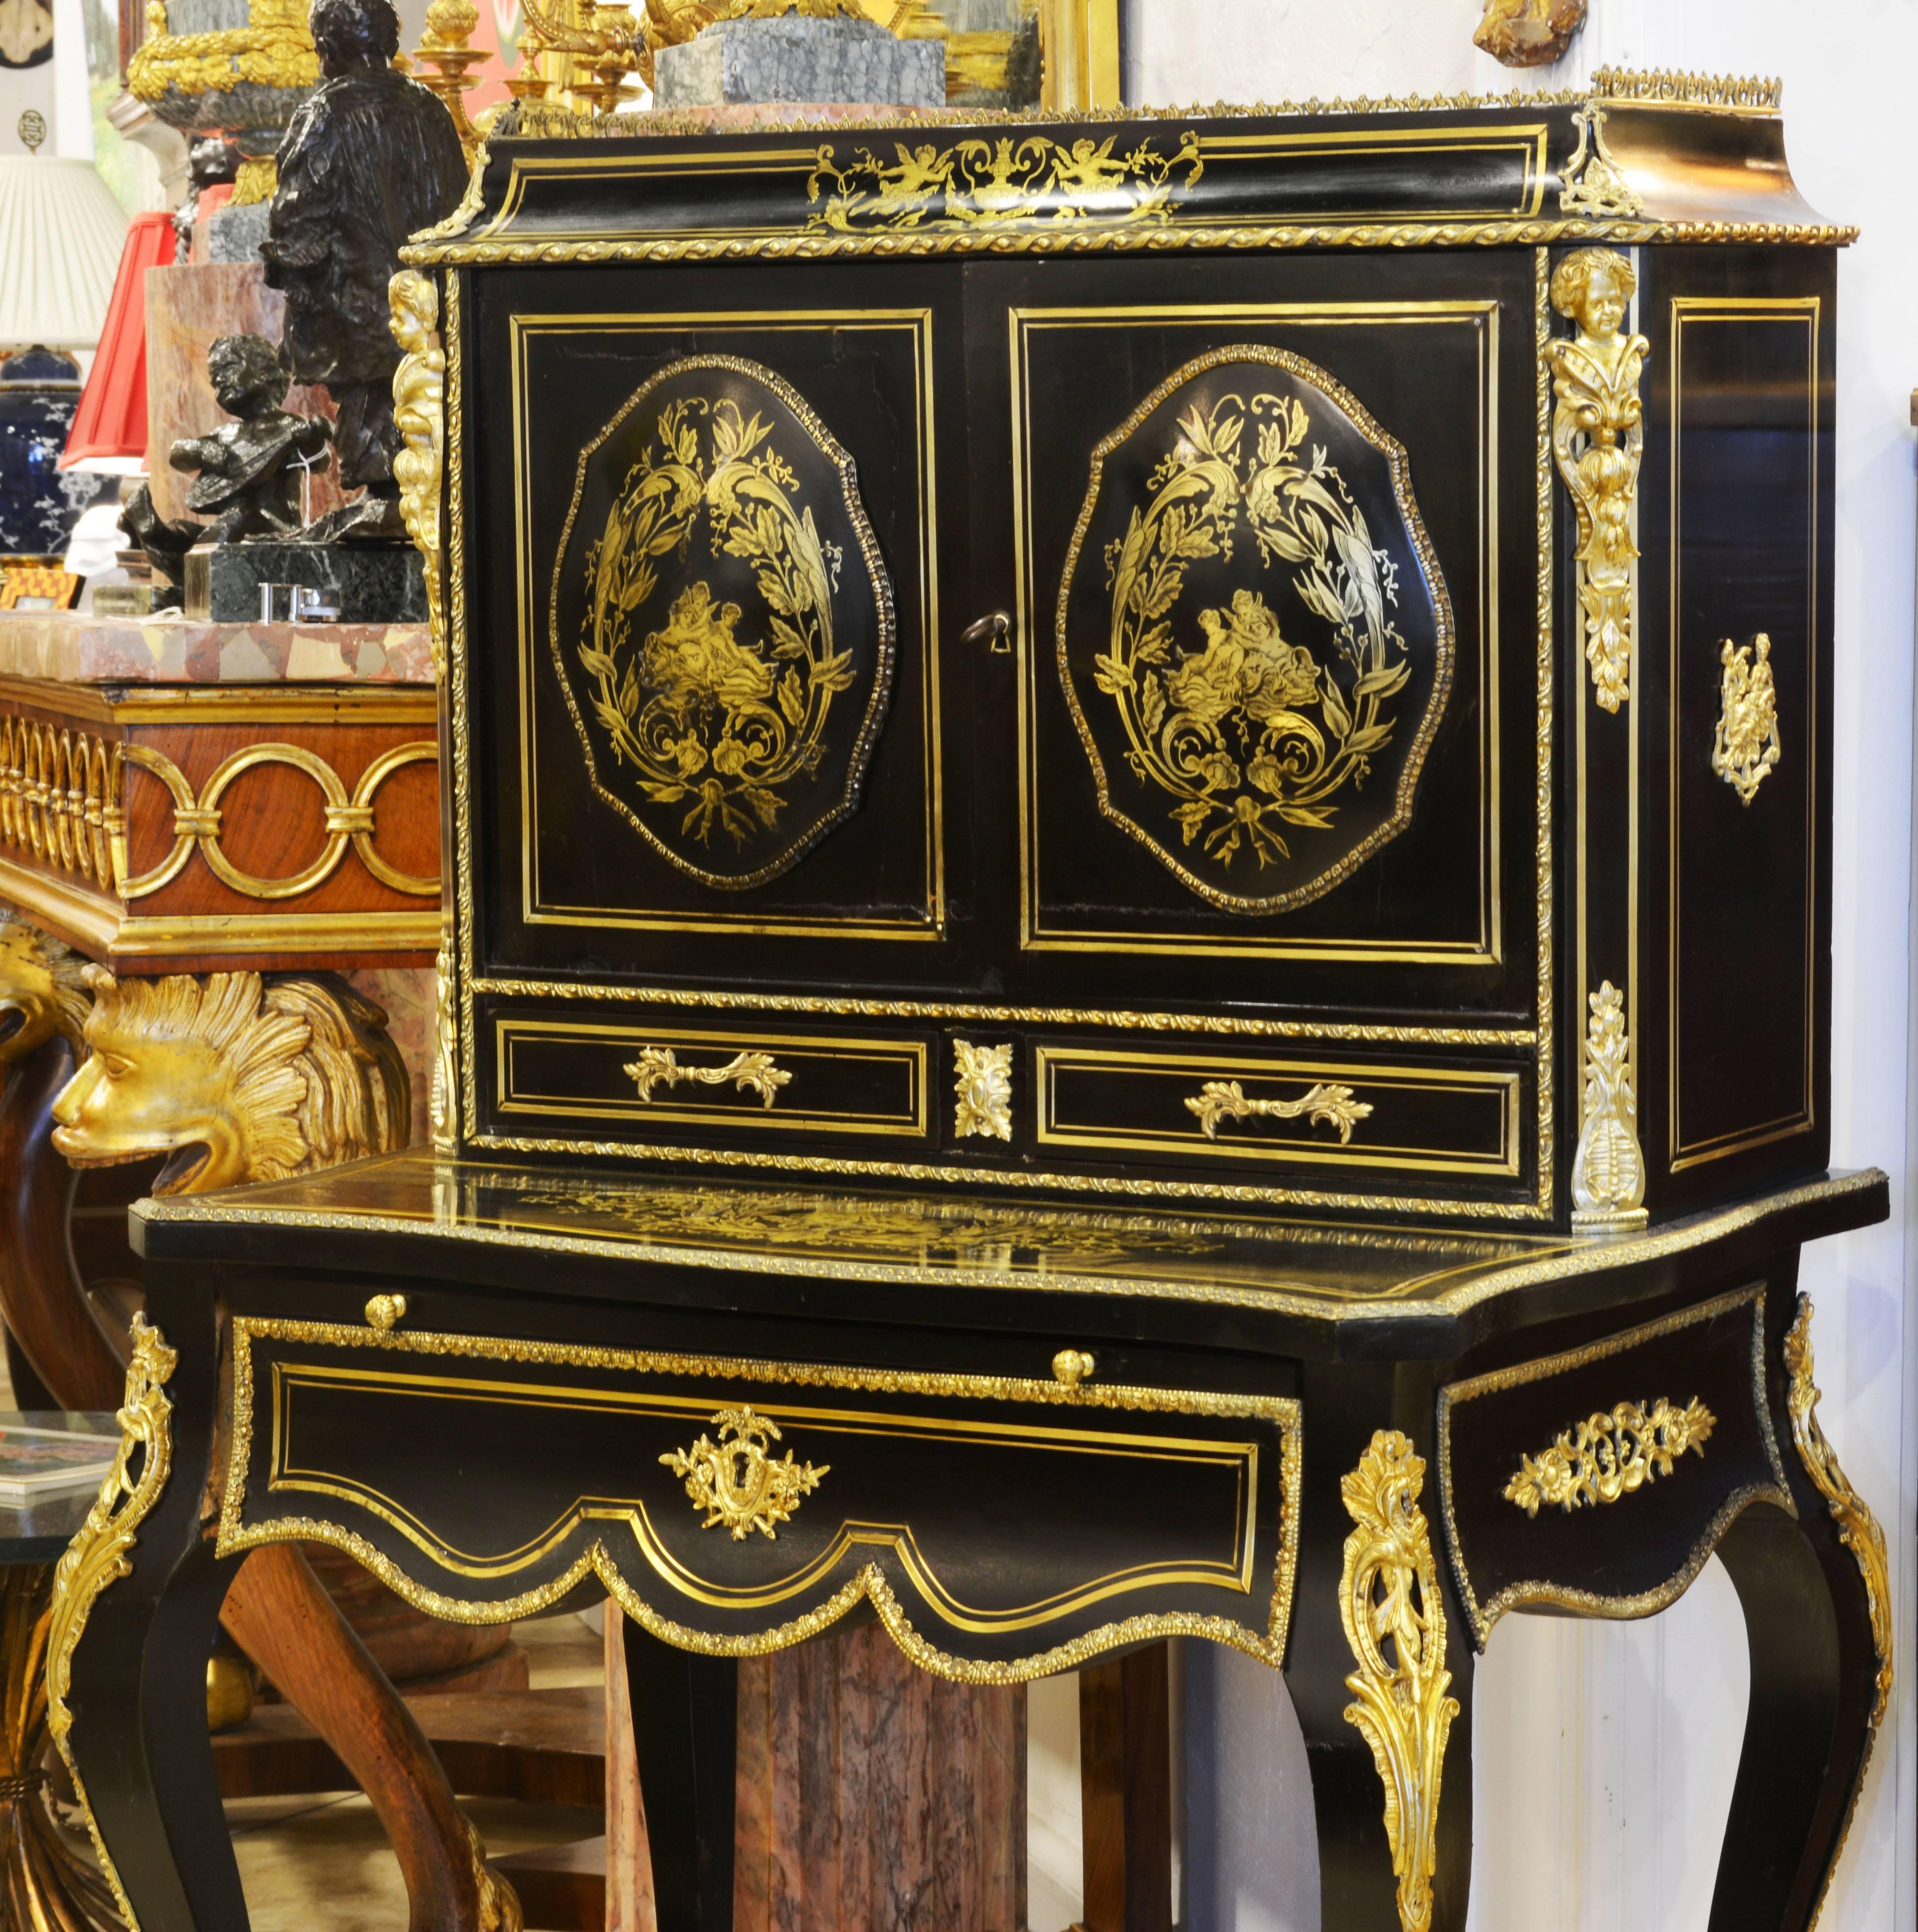 This superior desk features a gallery top above two domed paneled doors and two small drawers. The lower part offers a pull-out writing tablet above a long frieze drawer supported by elegantly curved cabriole legs ending in ormolu sabots. Over all